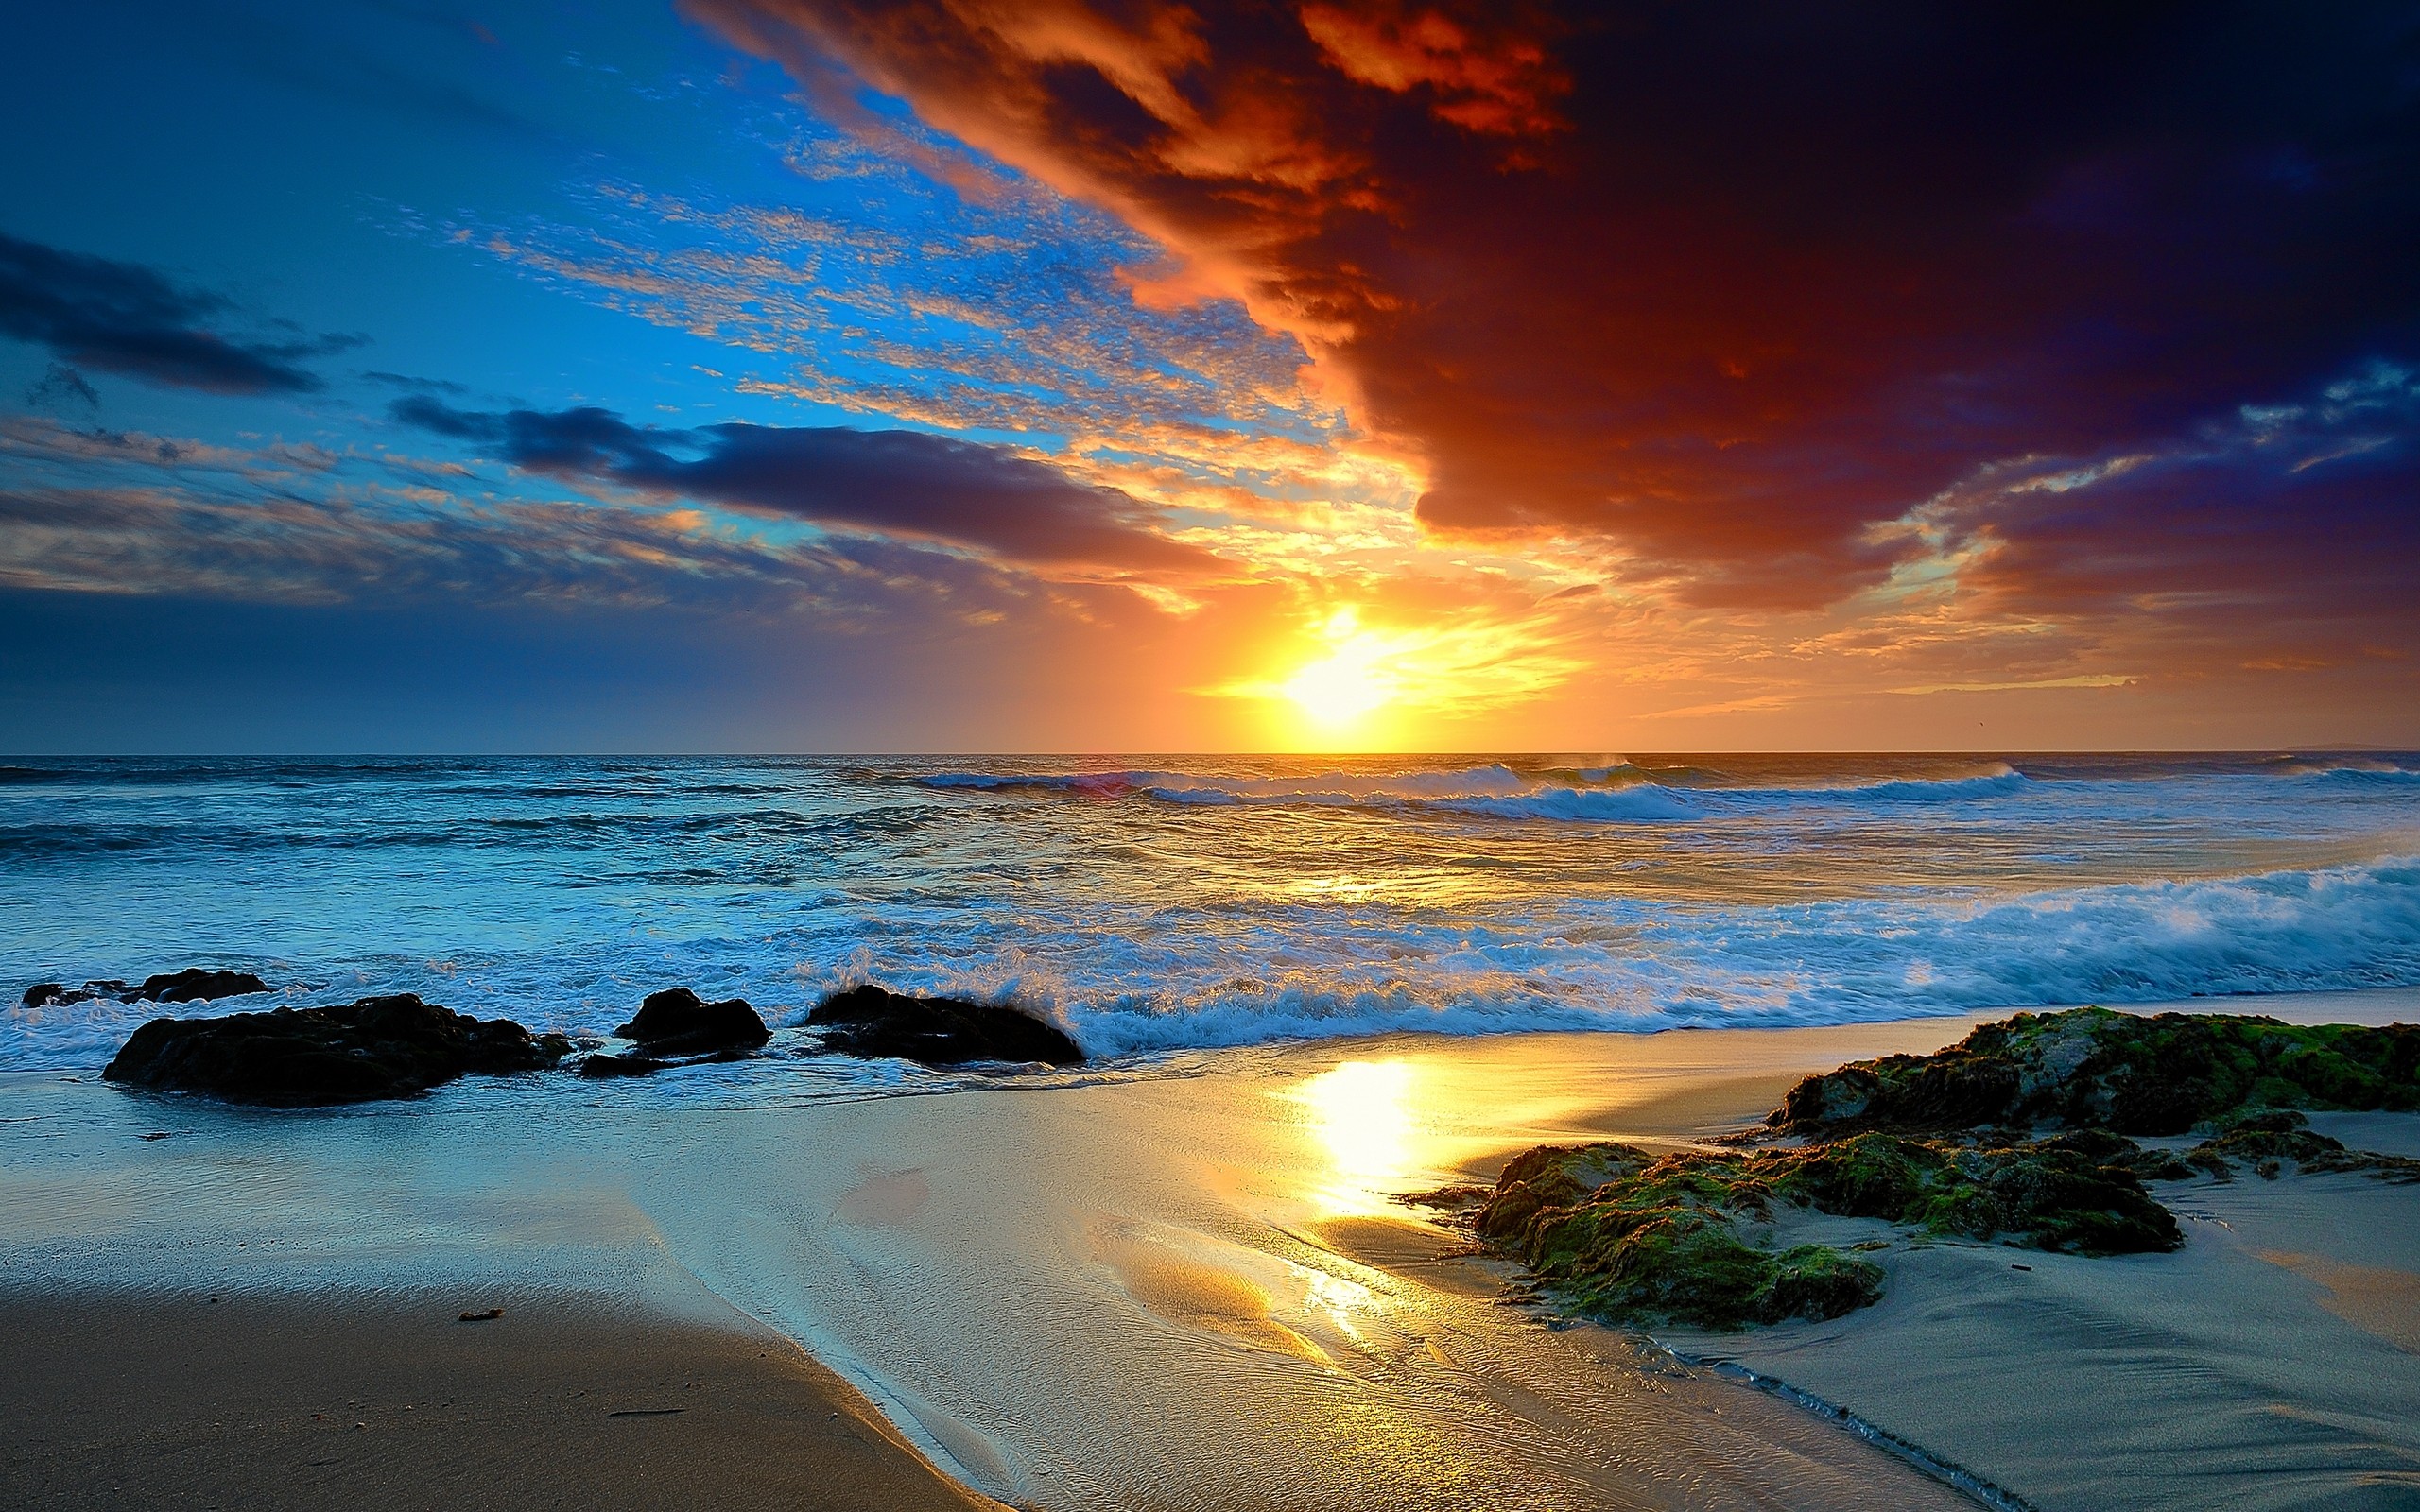 View And Download Free Beach Sunset Wallpapers,